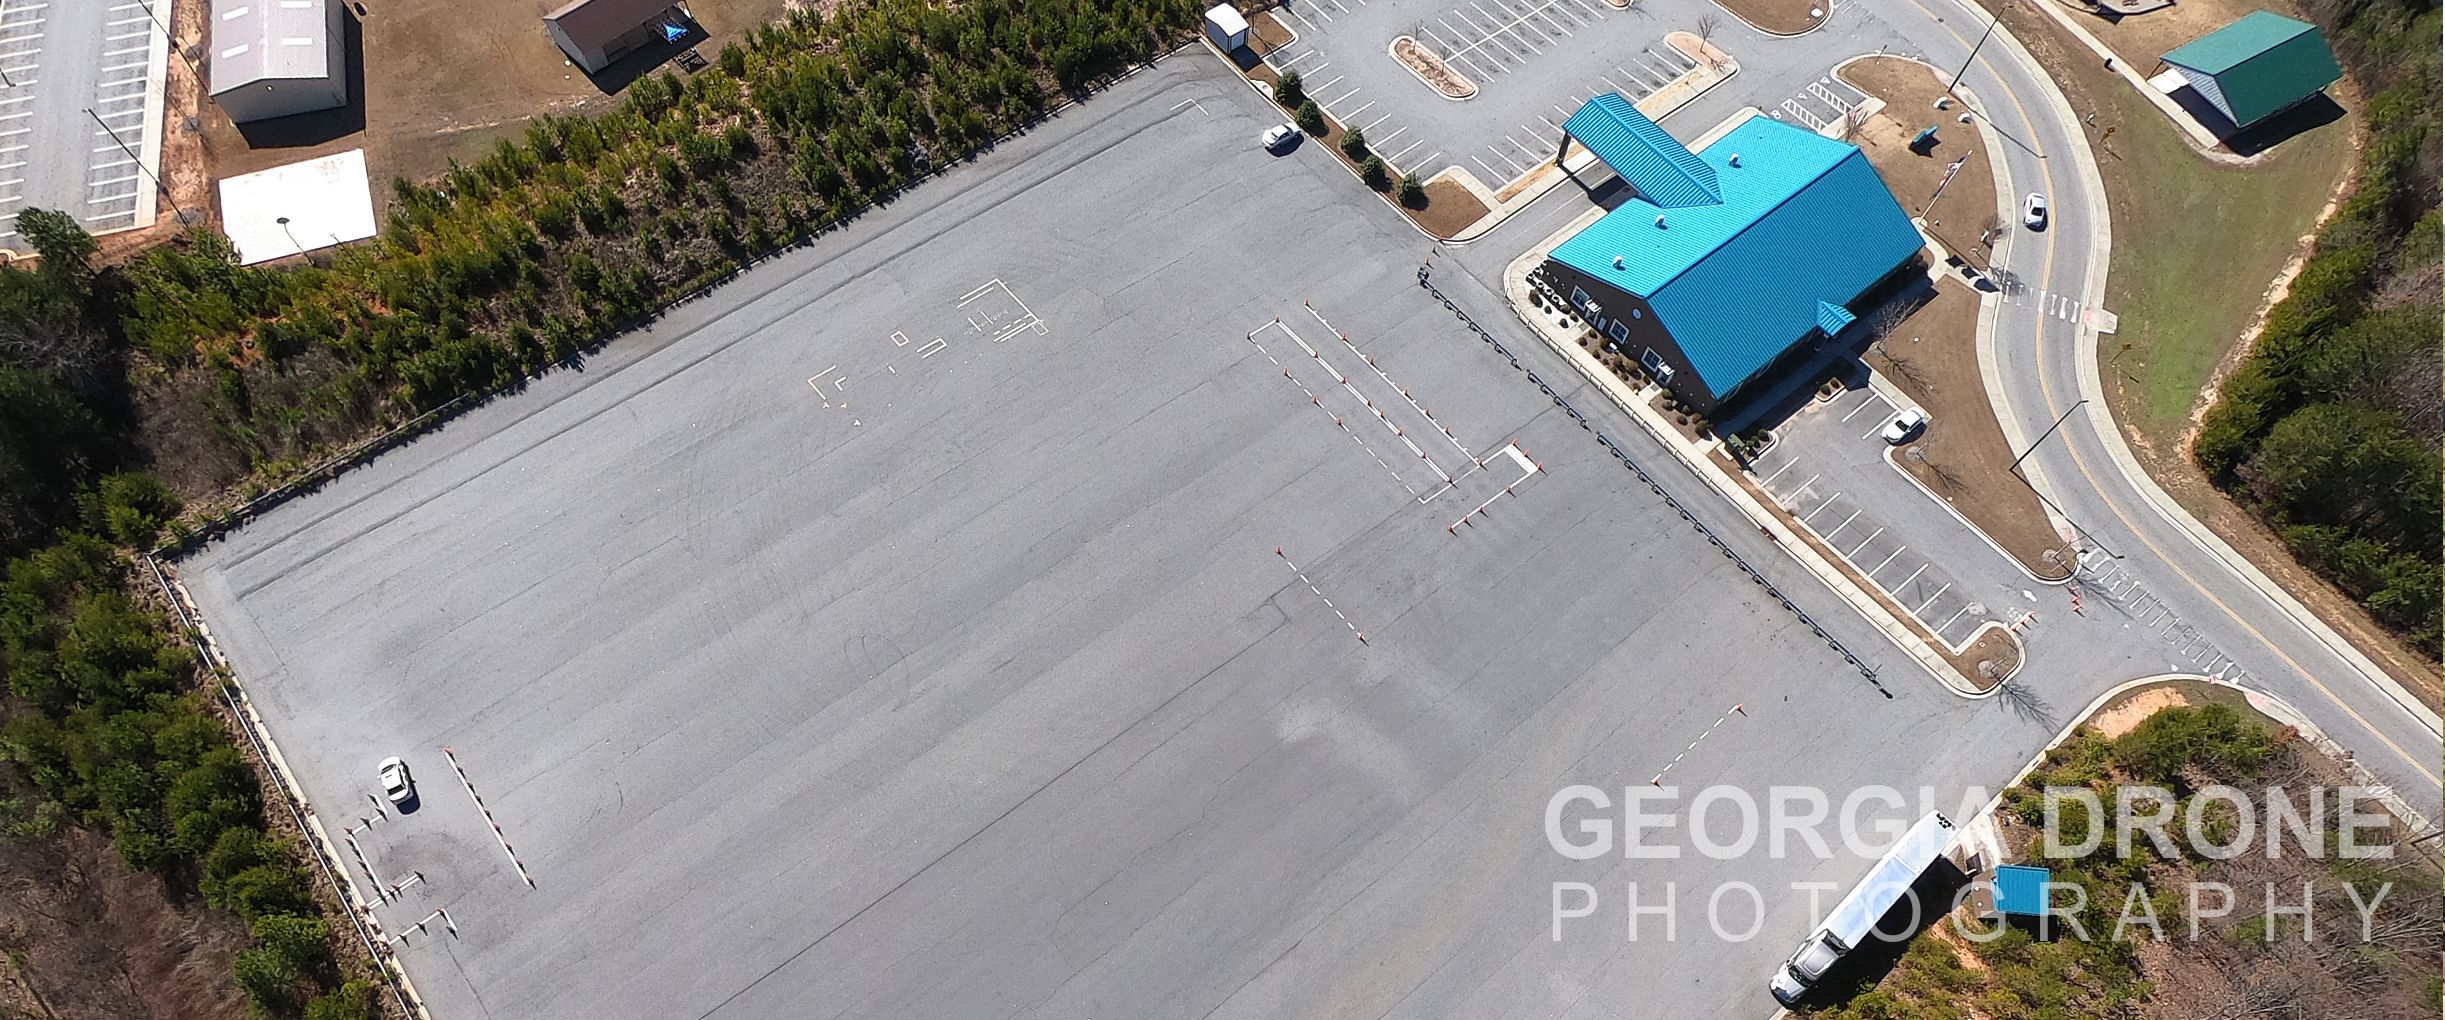 Drone inspection of commercial real estate in Cumming Georgia.